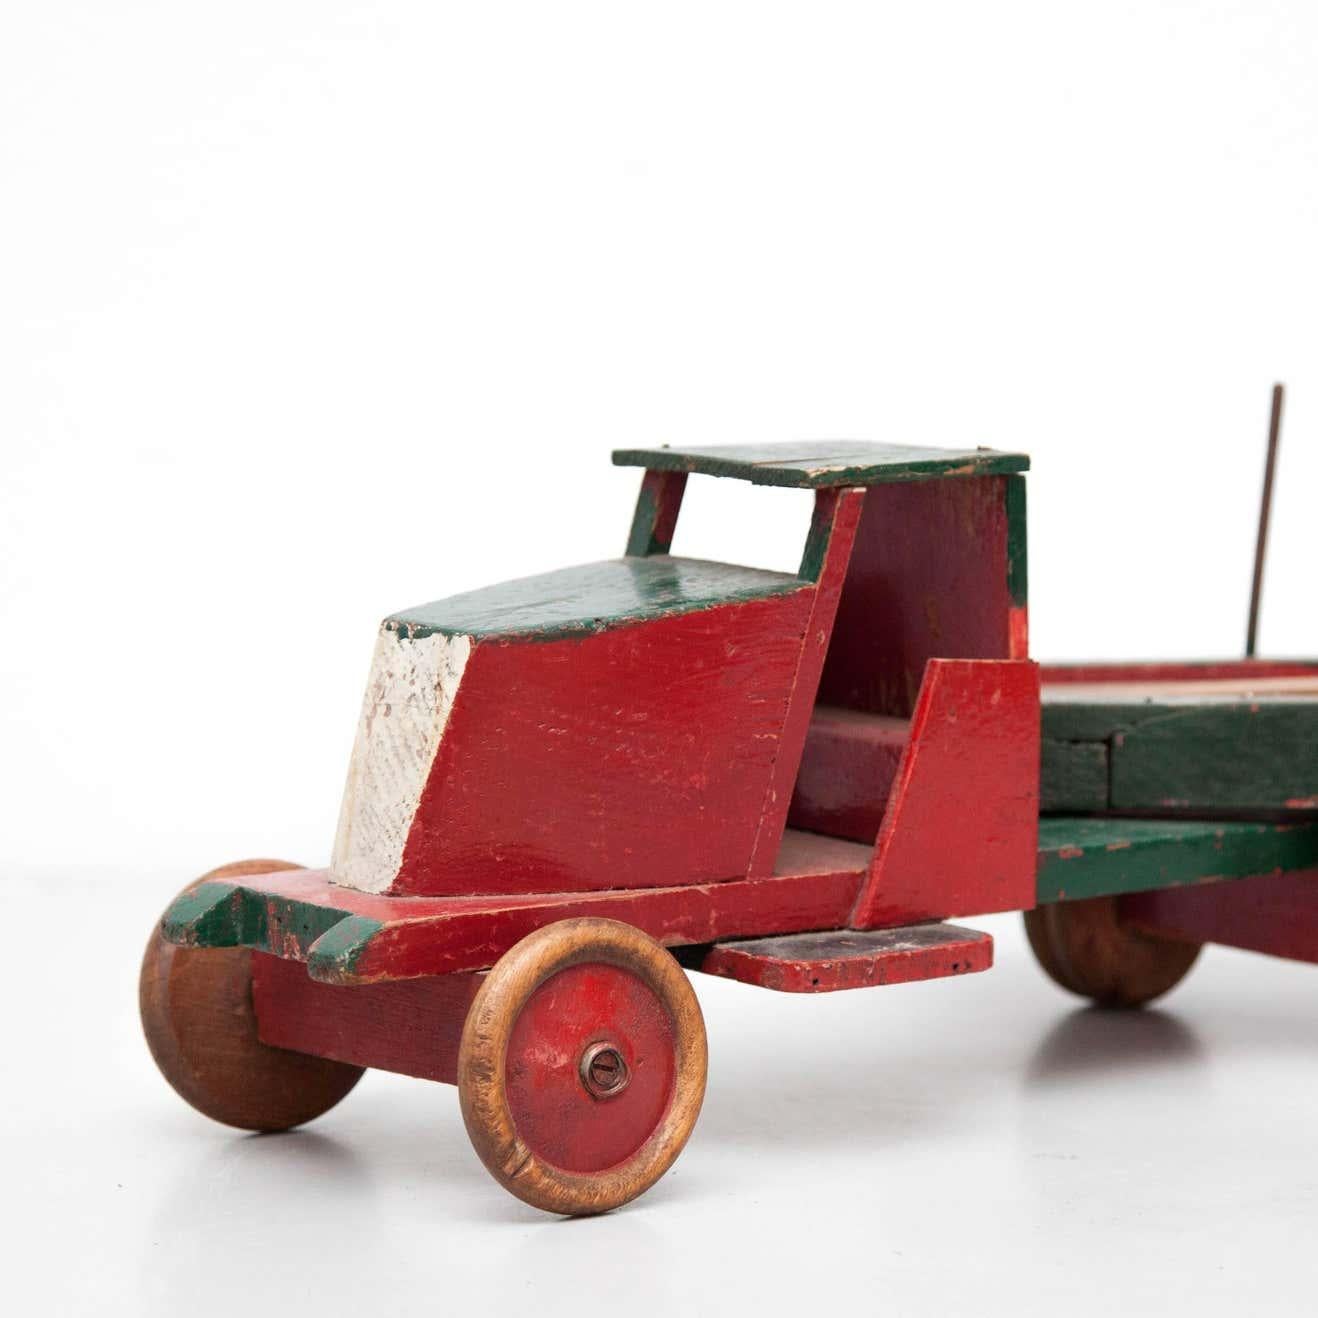 Toy designed by Ko Verzuu, circa 1940.
Manufactured by ADO in Netherlands.

Truck & trailer of wood 